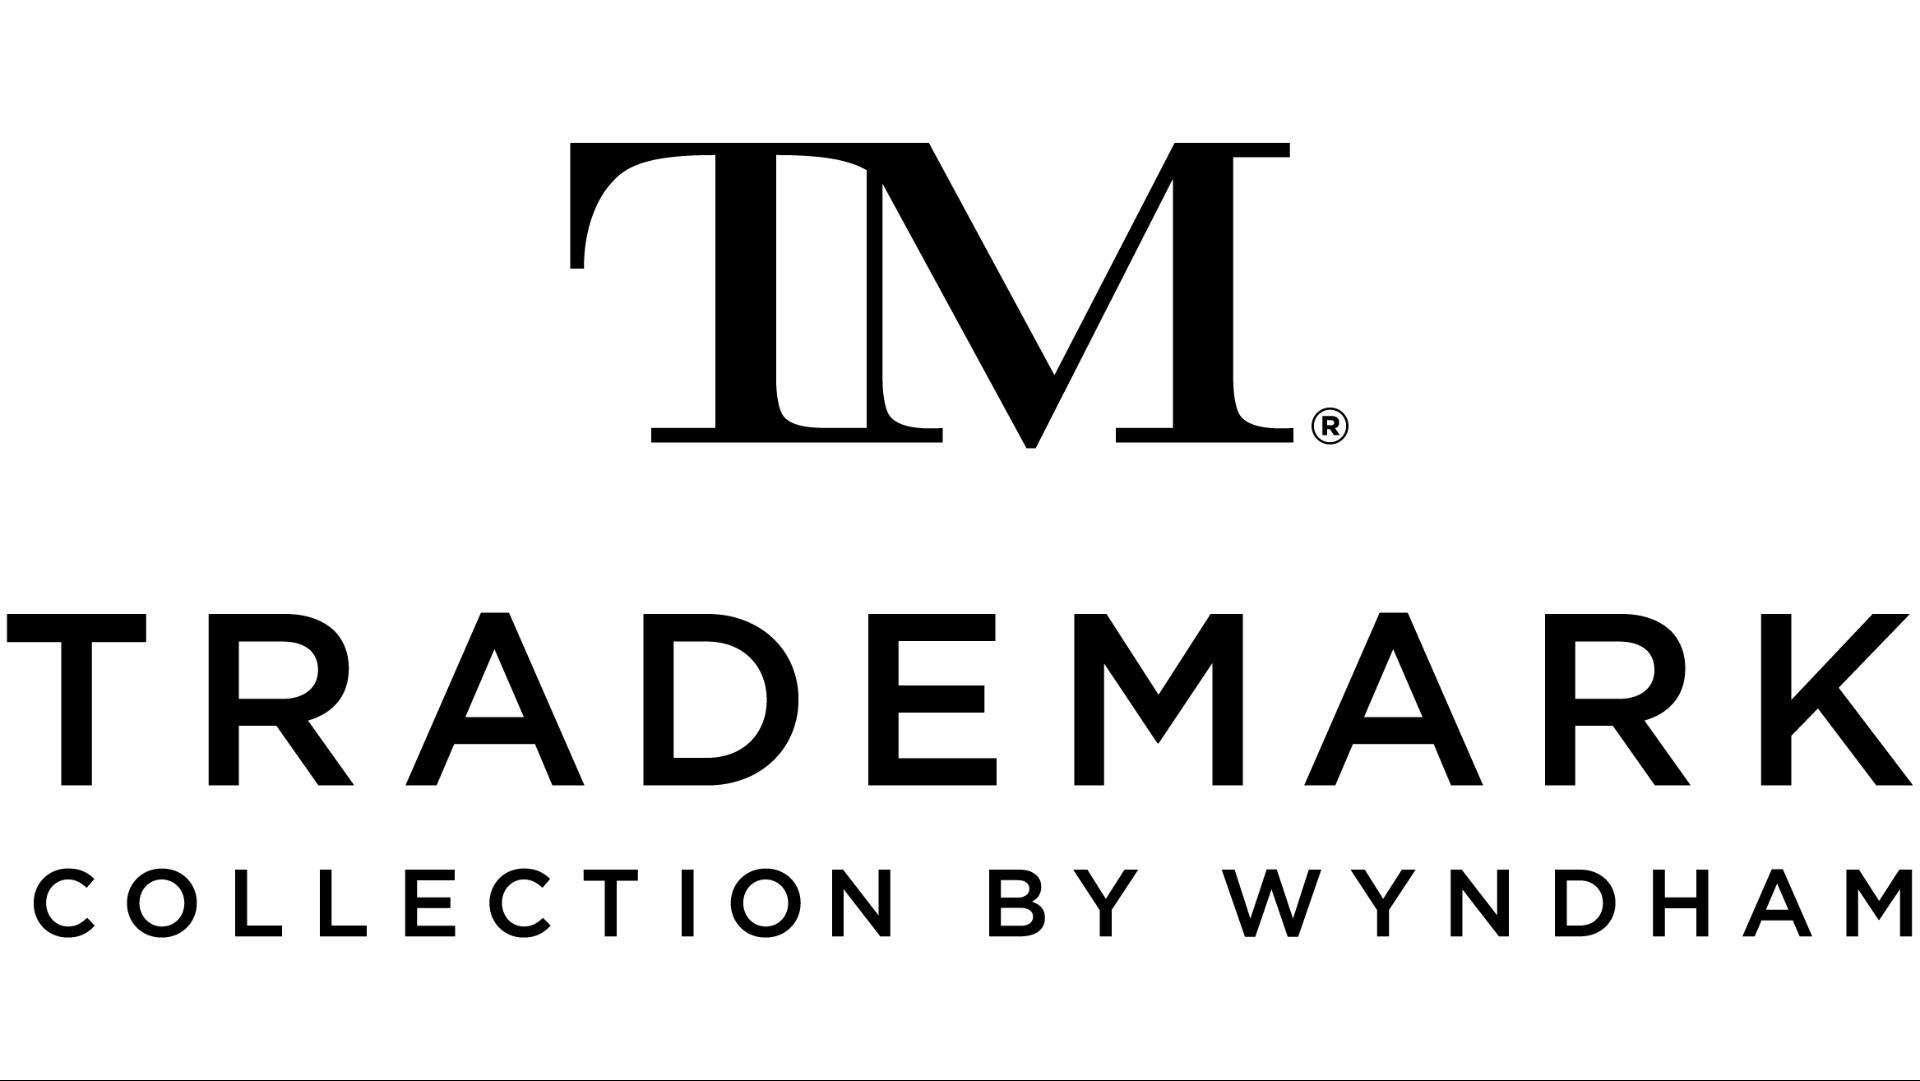 The Haas, Trademark Collection by Wyndham in Los Angeles, CA